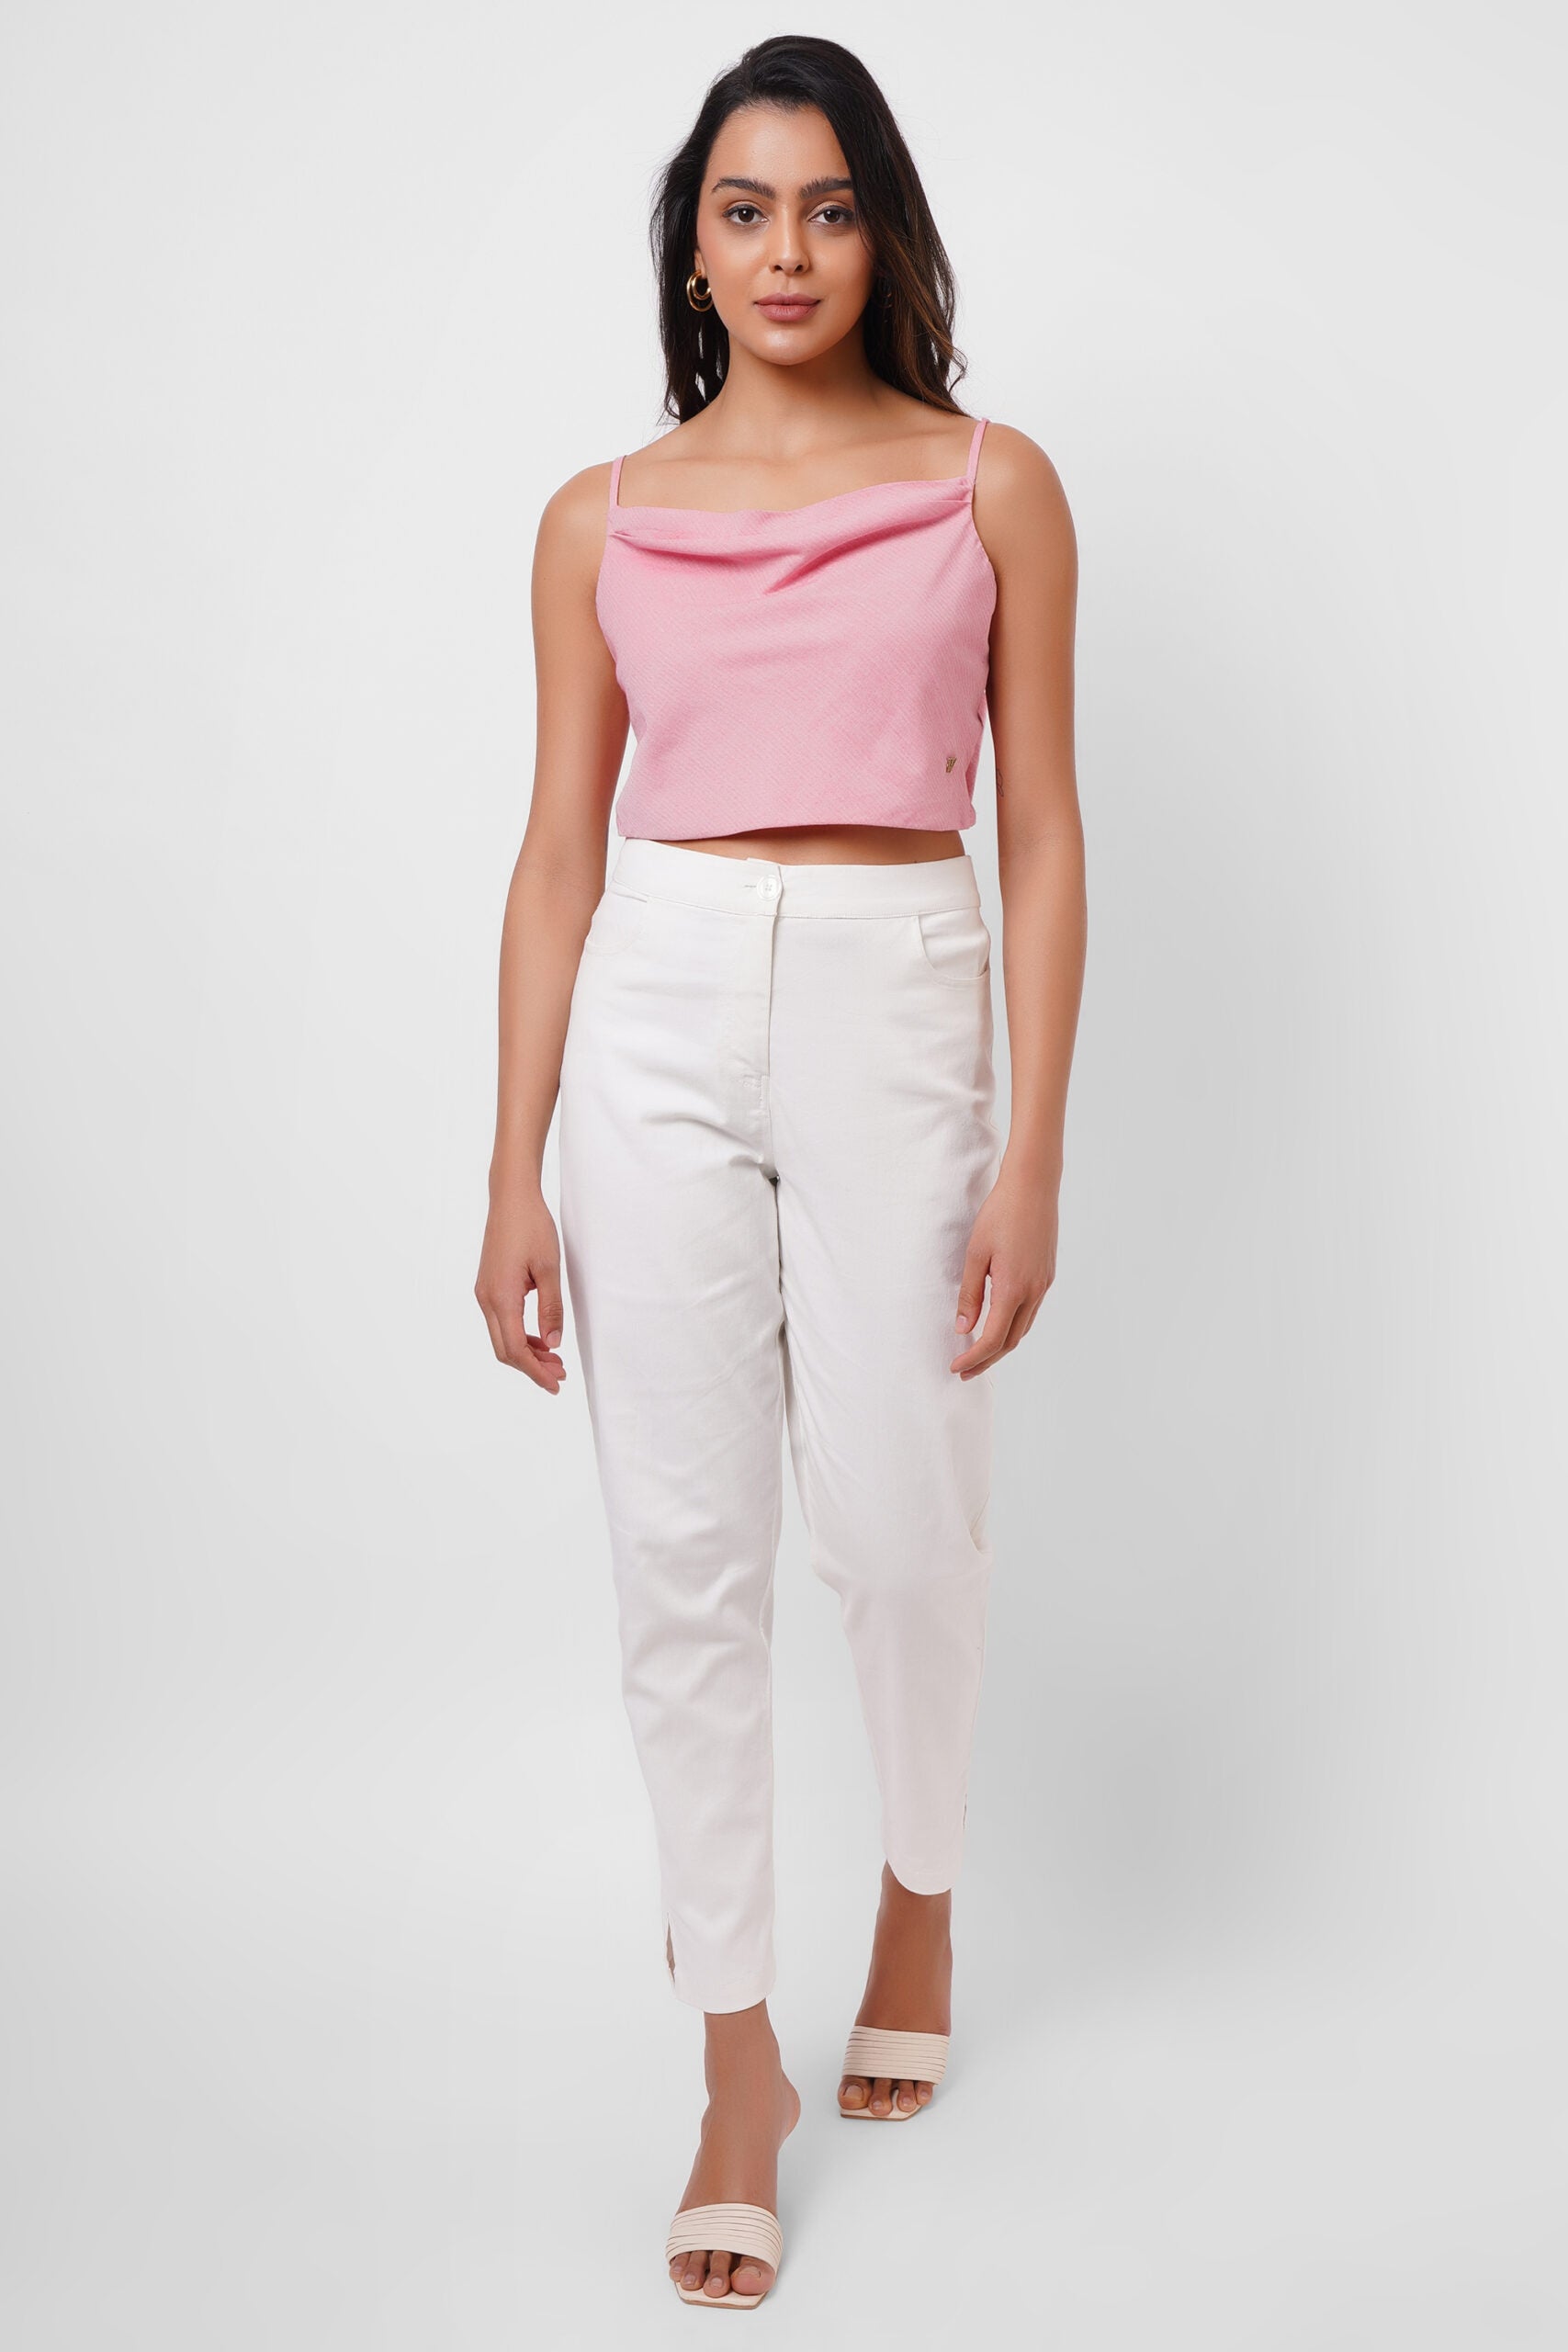 First Date Wear Sleeveless Pink Top With Back Bow - Western Era  Tops